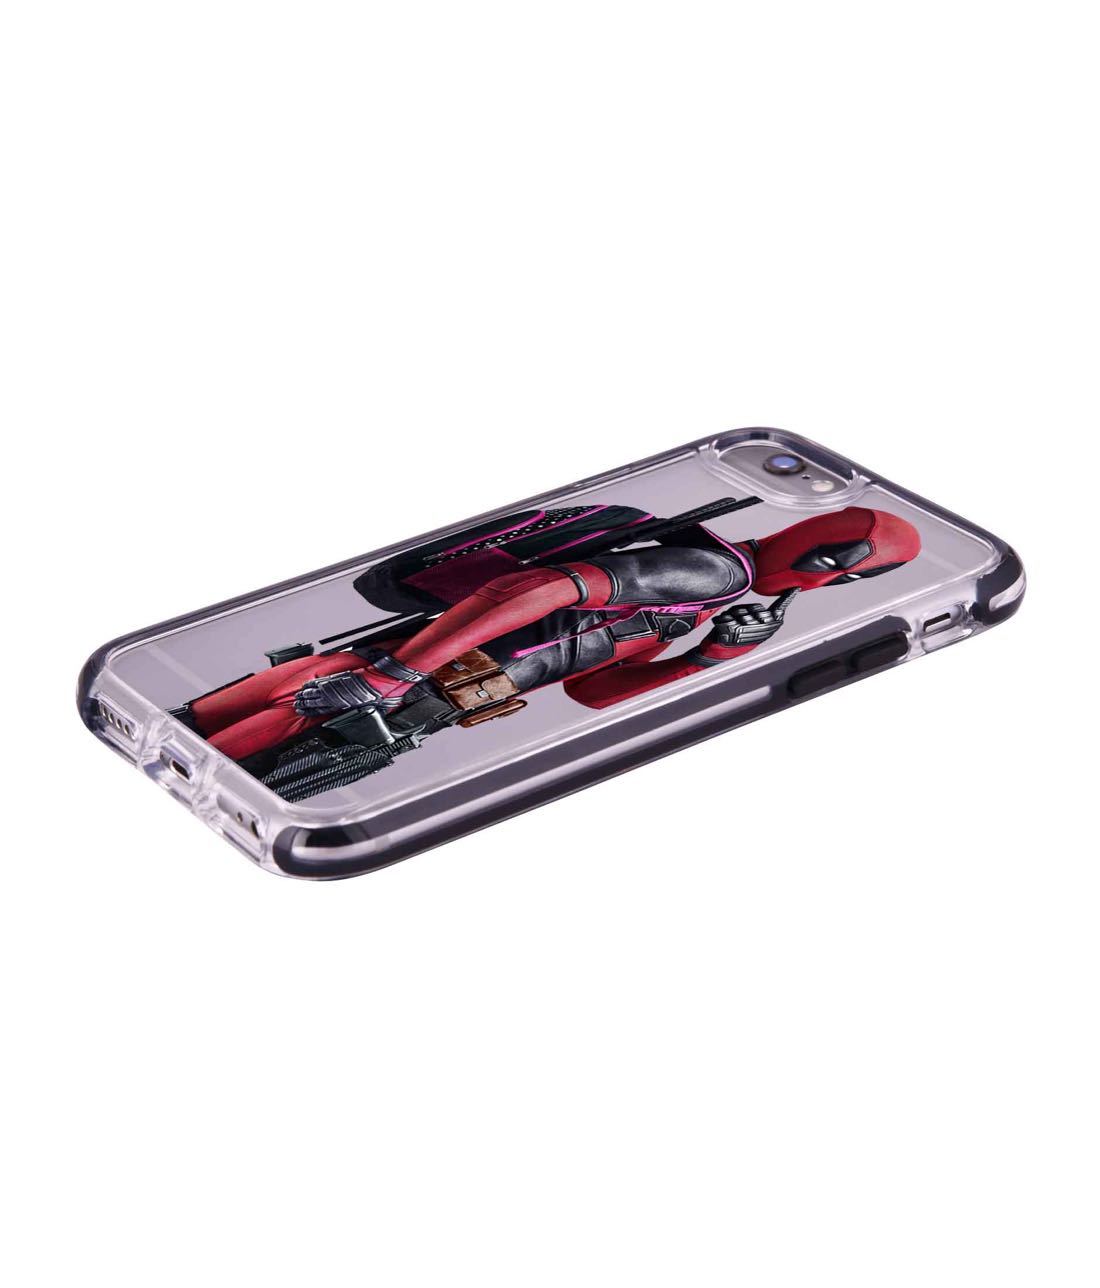 Smart Ass Deadpool - Extreme Phone Case for iPhone 6S